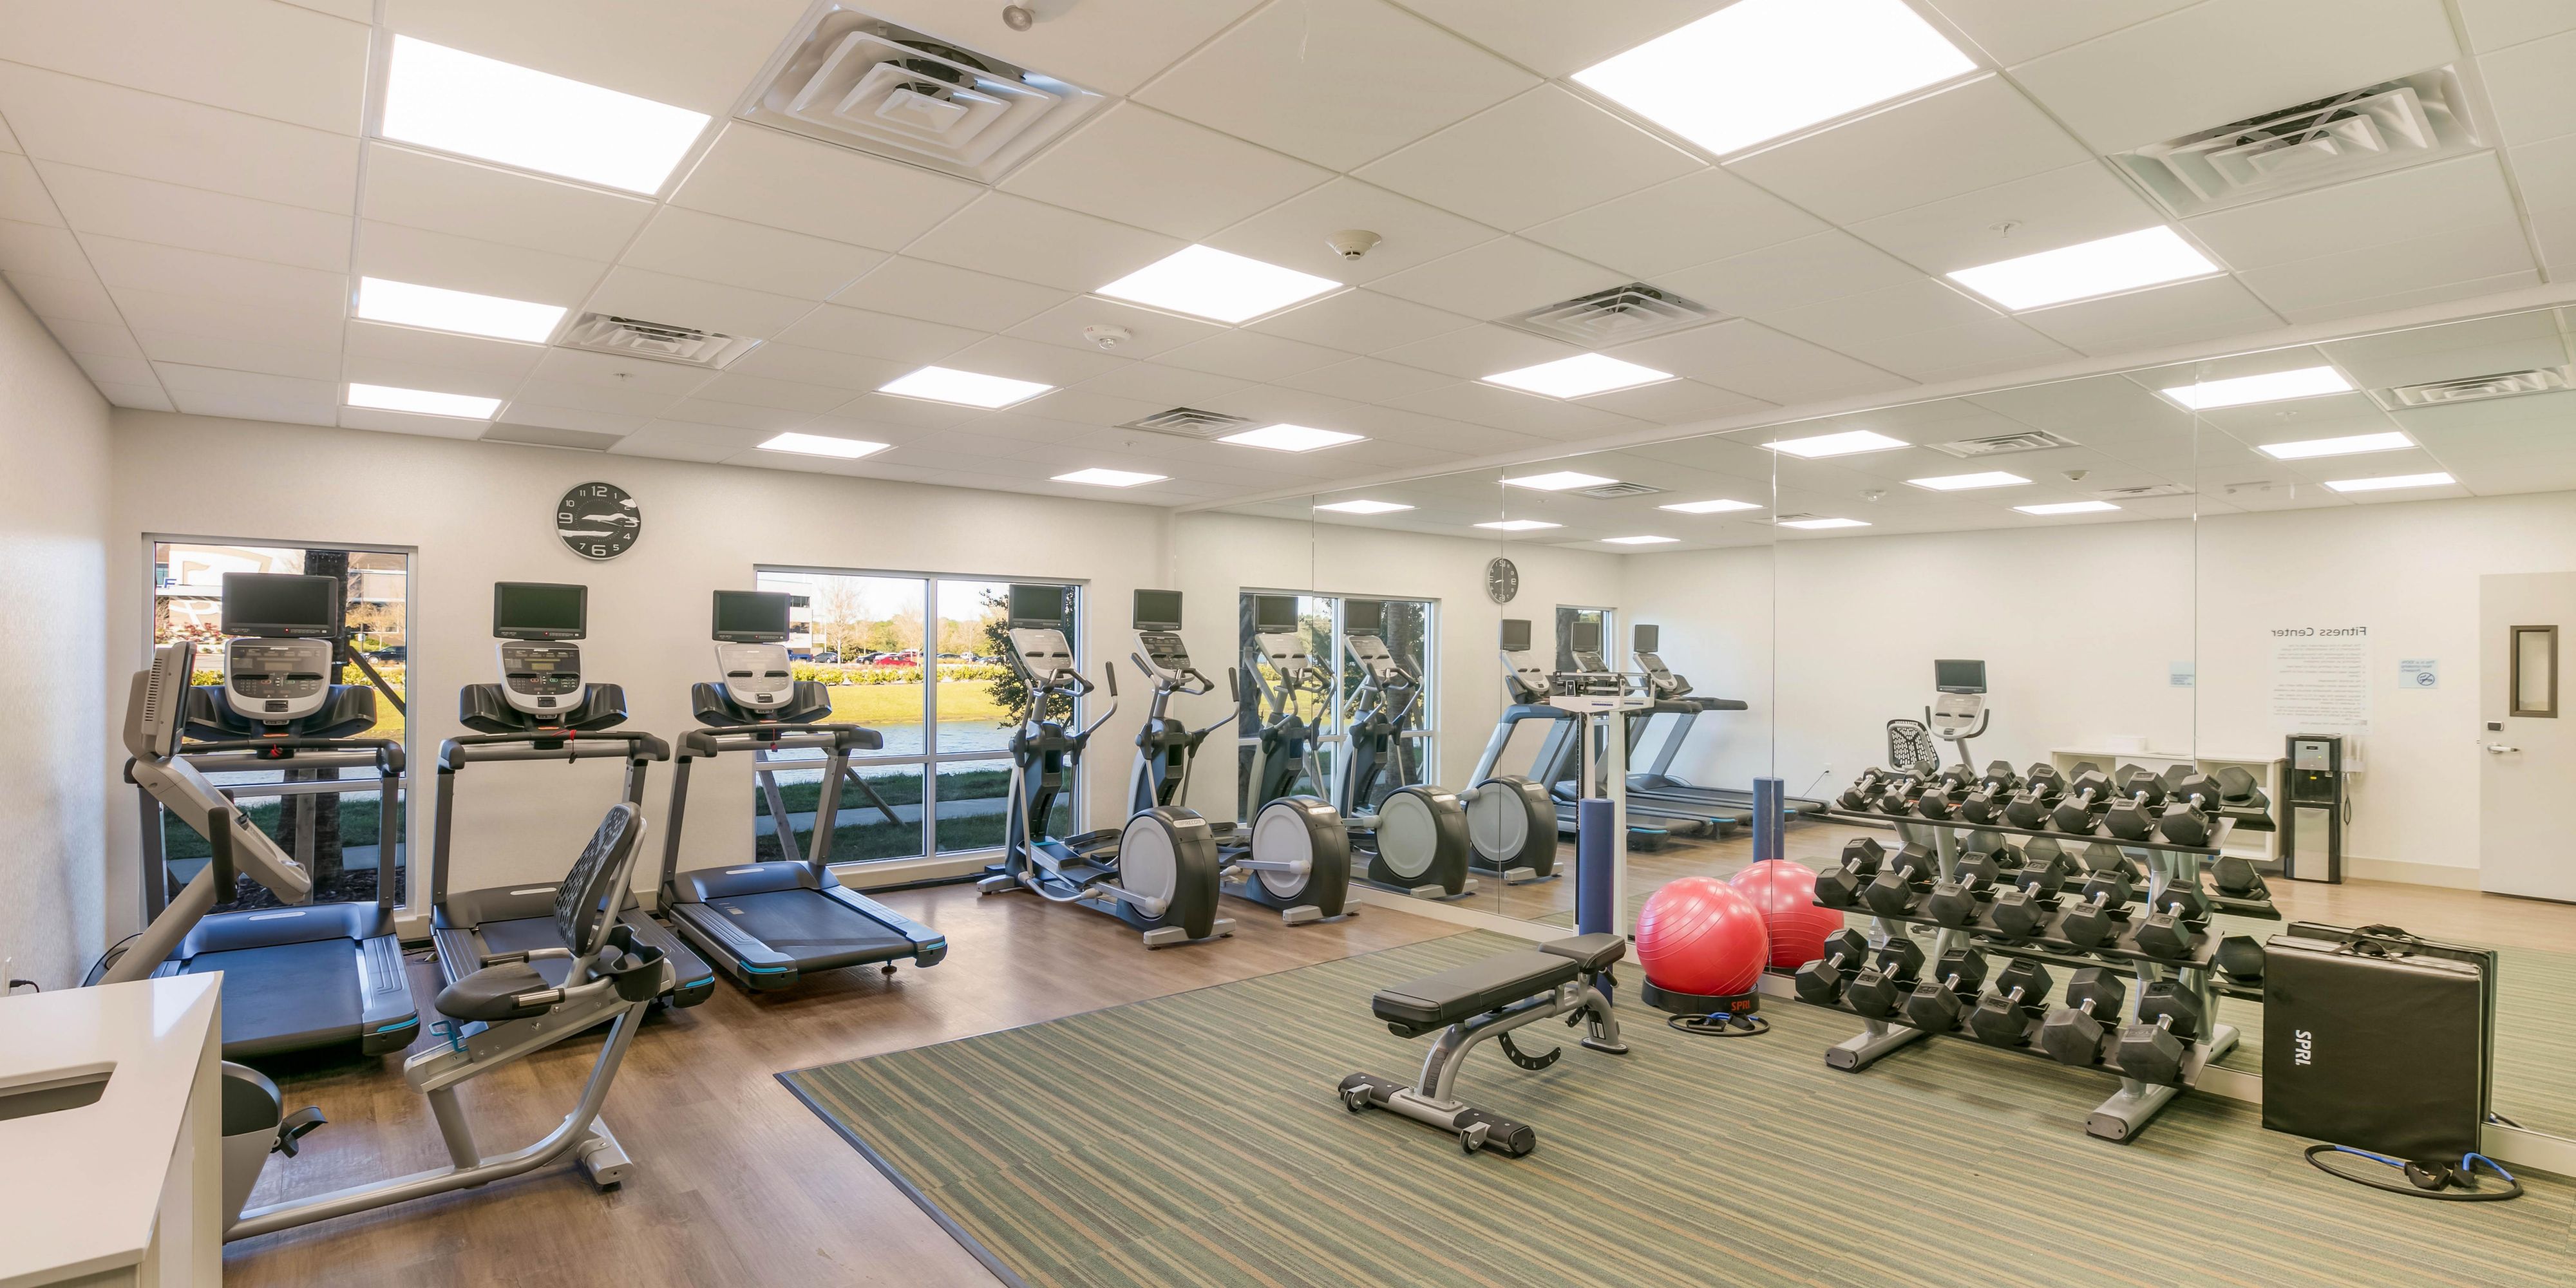 Stay active with our complimentary 24-hour fitness center equipped with everything you need to maintain your workout routine, no matter the time of day. You'll find three treadmills, an elliptical trainer, a recumbent bike, and free weights. Whether you prefer cardio or strength training, our fitness center has you covered.